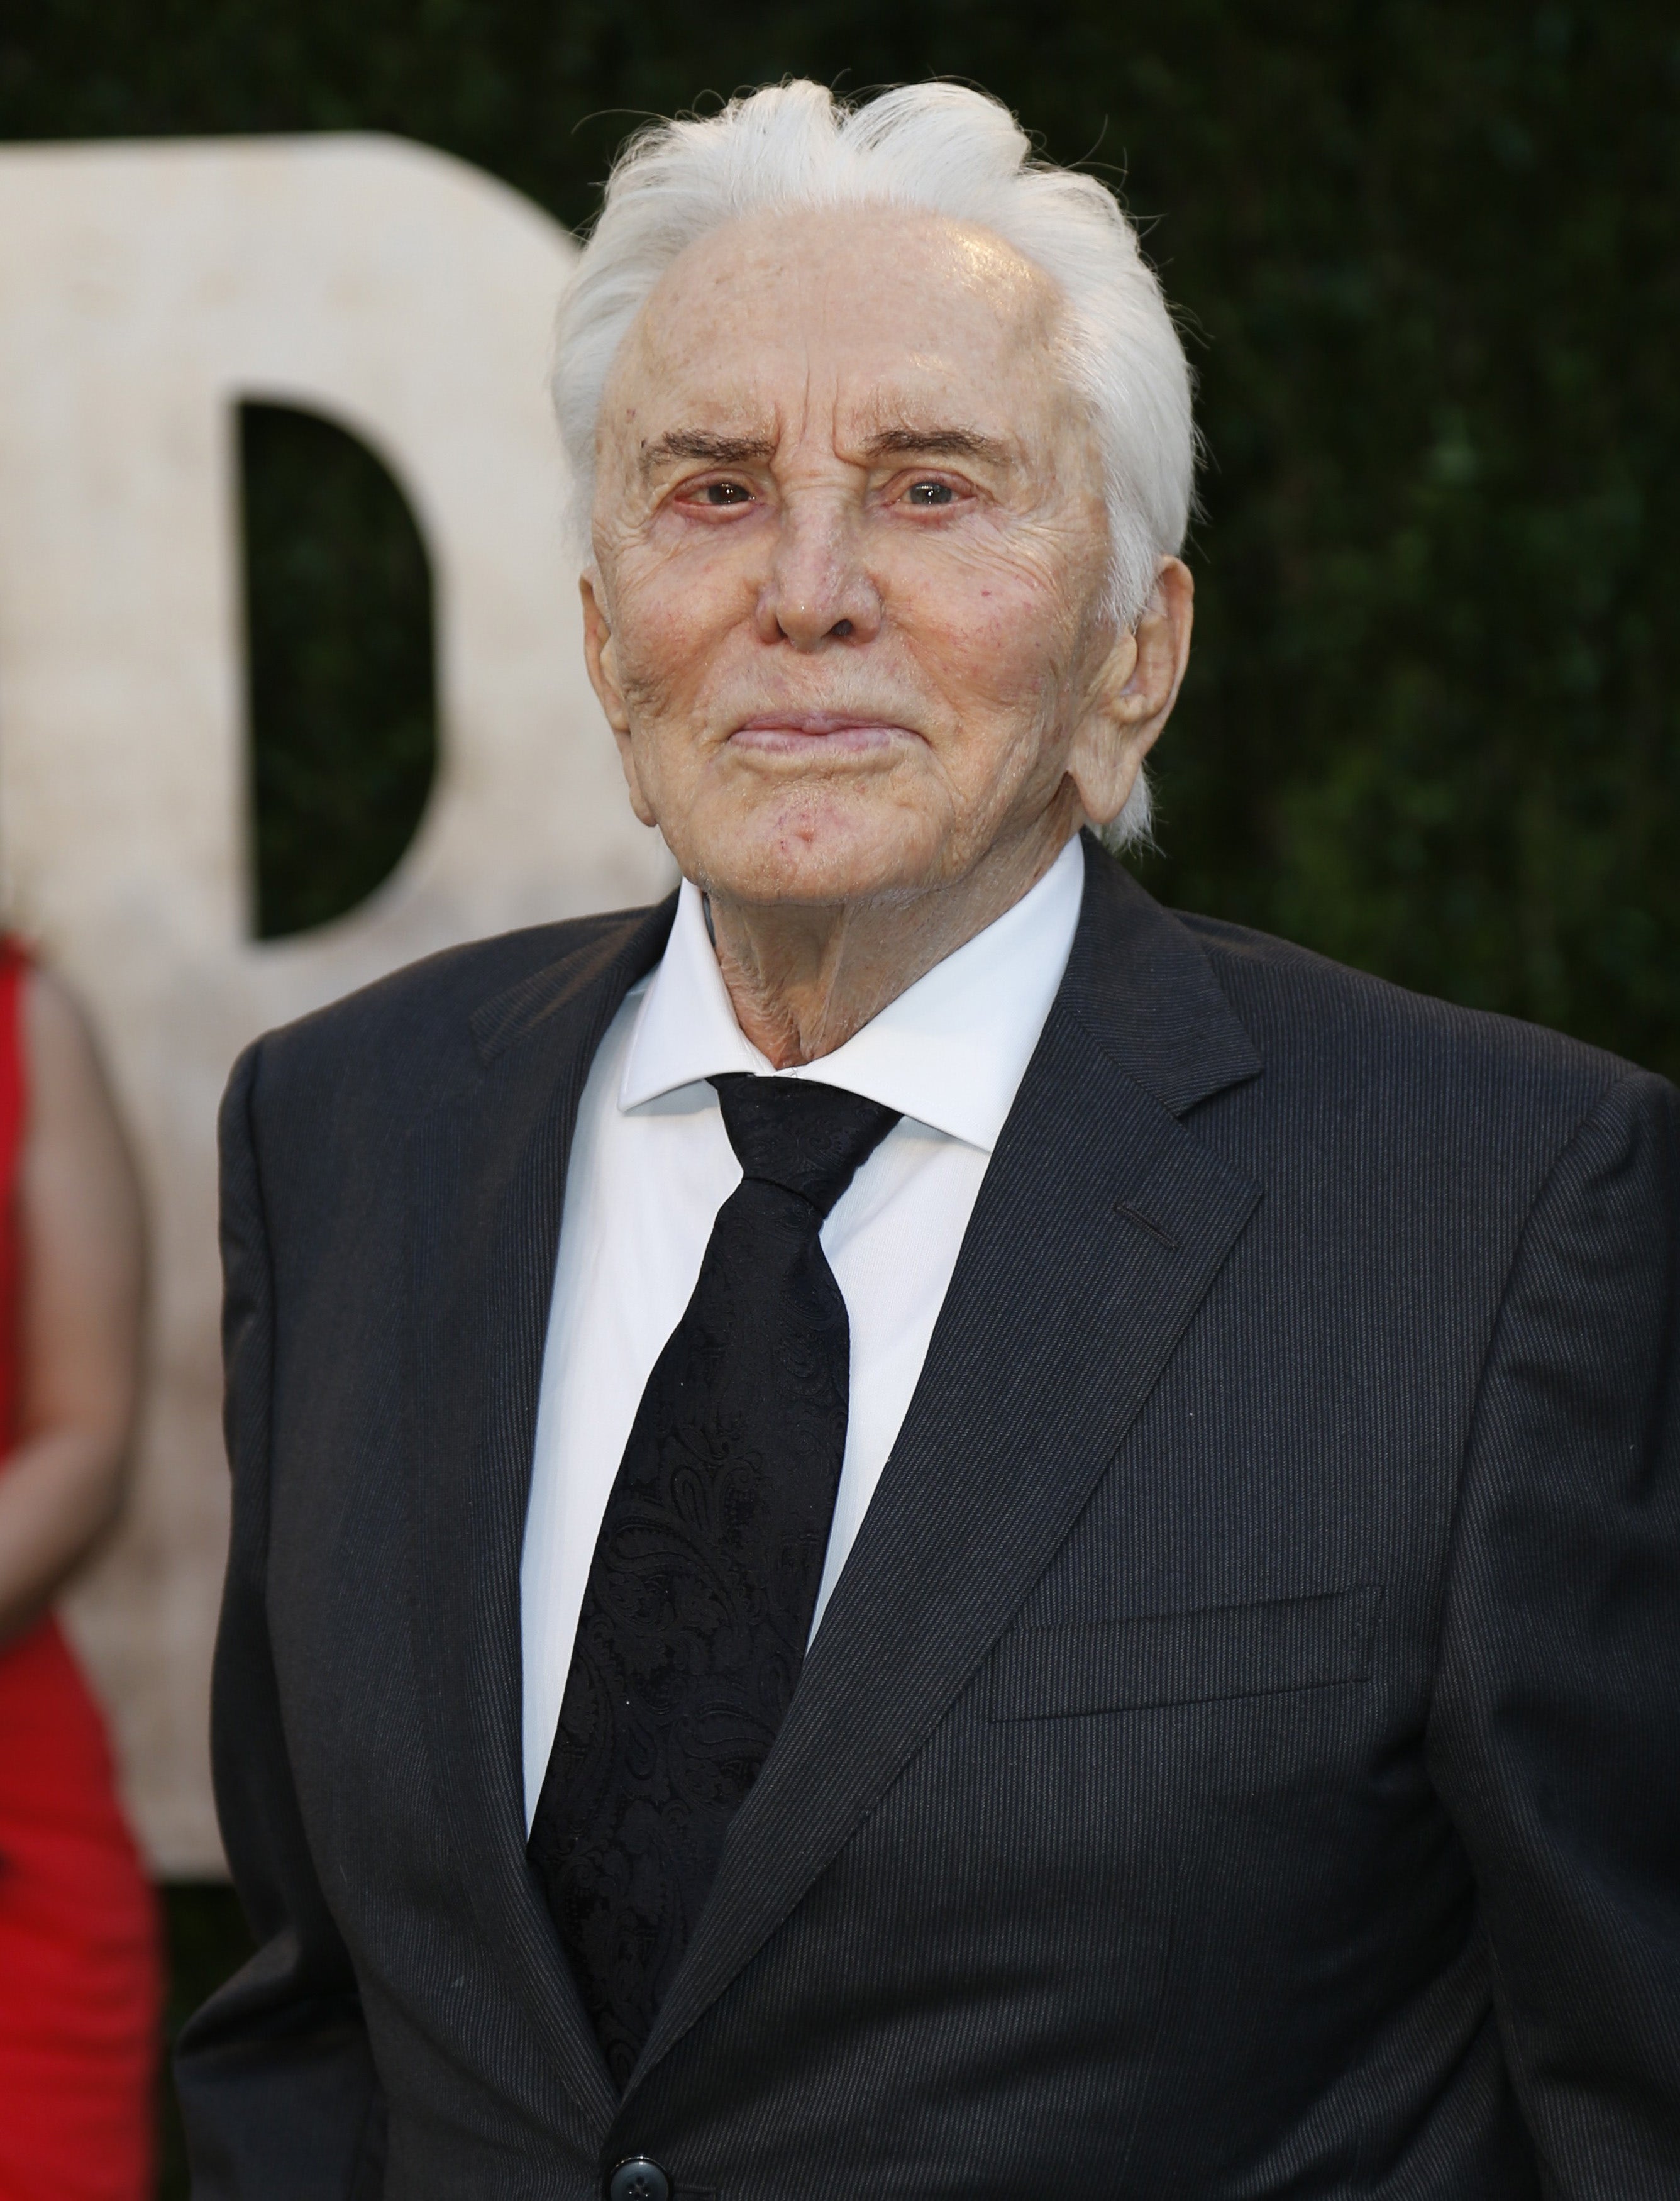 Kirk Douglas, 98, snubbed by hometown high school's hall of fame | Fox News